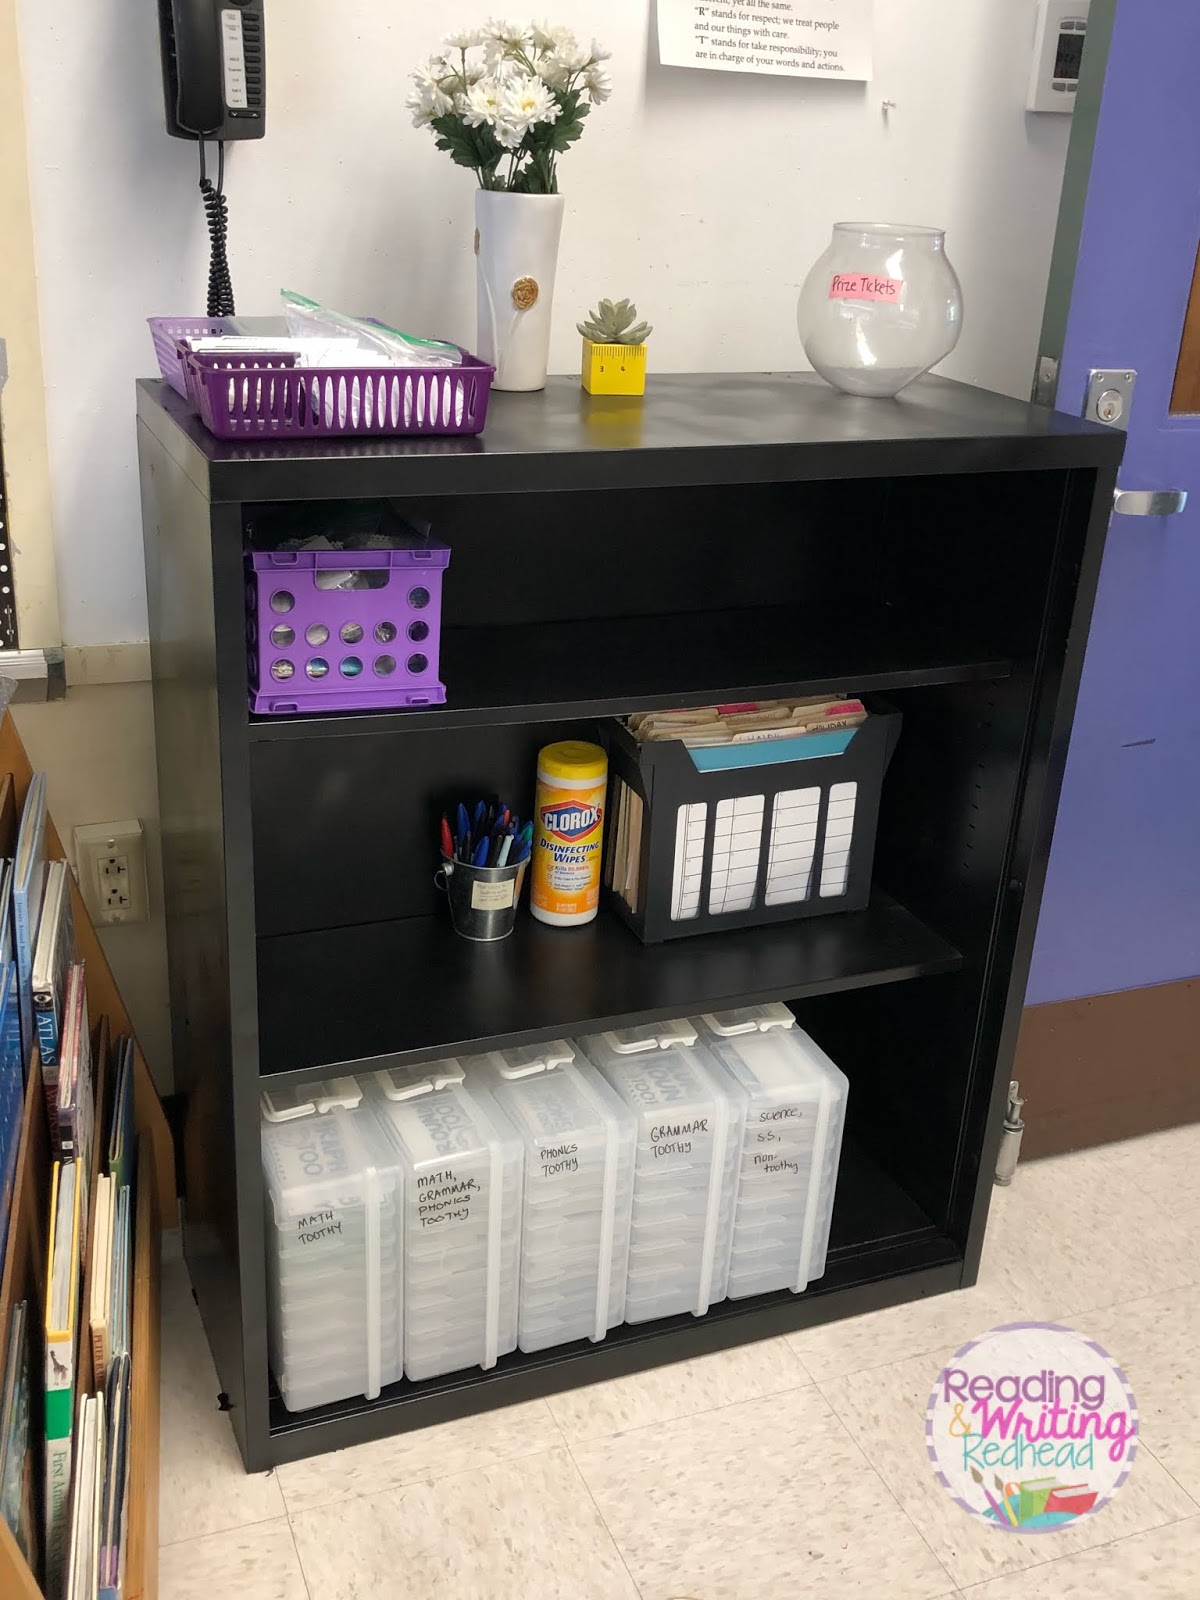 Iris photo storage cases on display in flexible seating classroom 